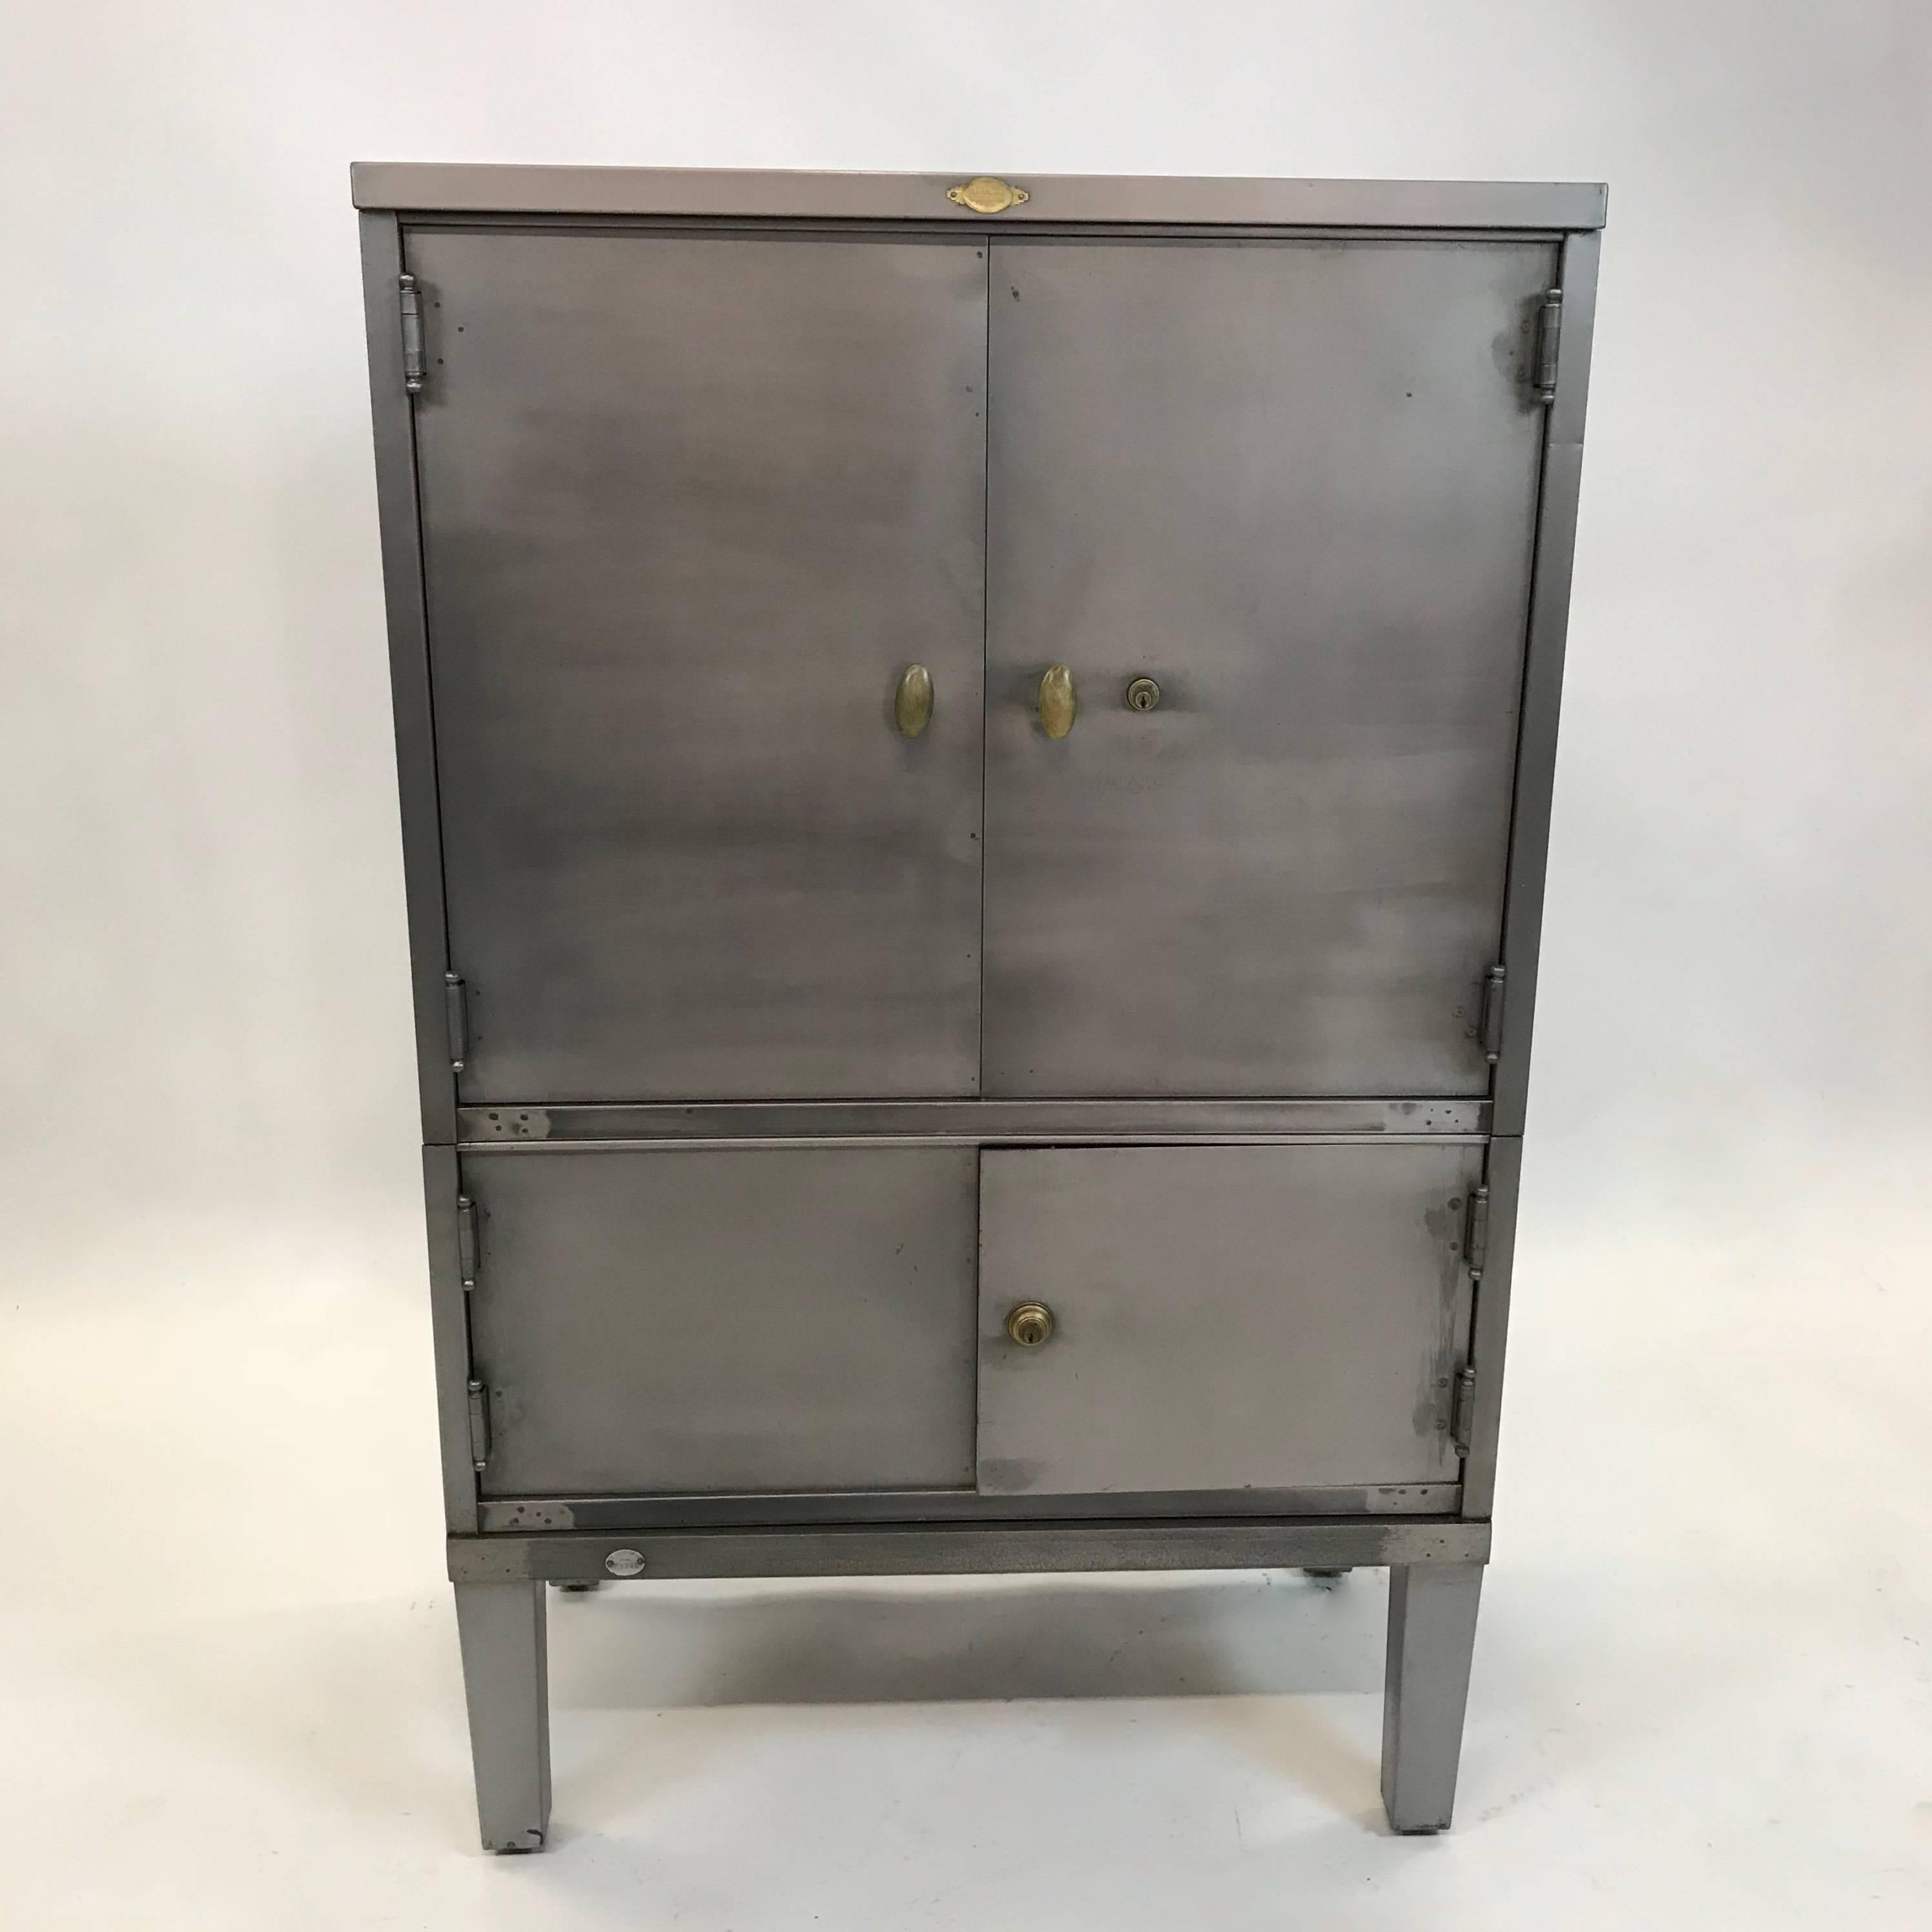 1930s industrial, Art Deco, office, document cabinet by Art Metal features a newly brushed steel finish with brass accents has closed top storage 25 inches height and bottom storage at 13 inches height. Interior finish is its original brown finish.